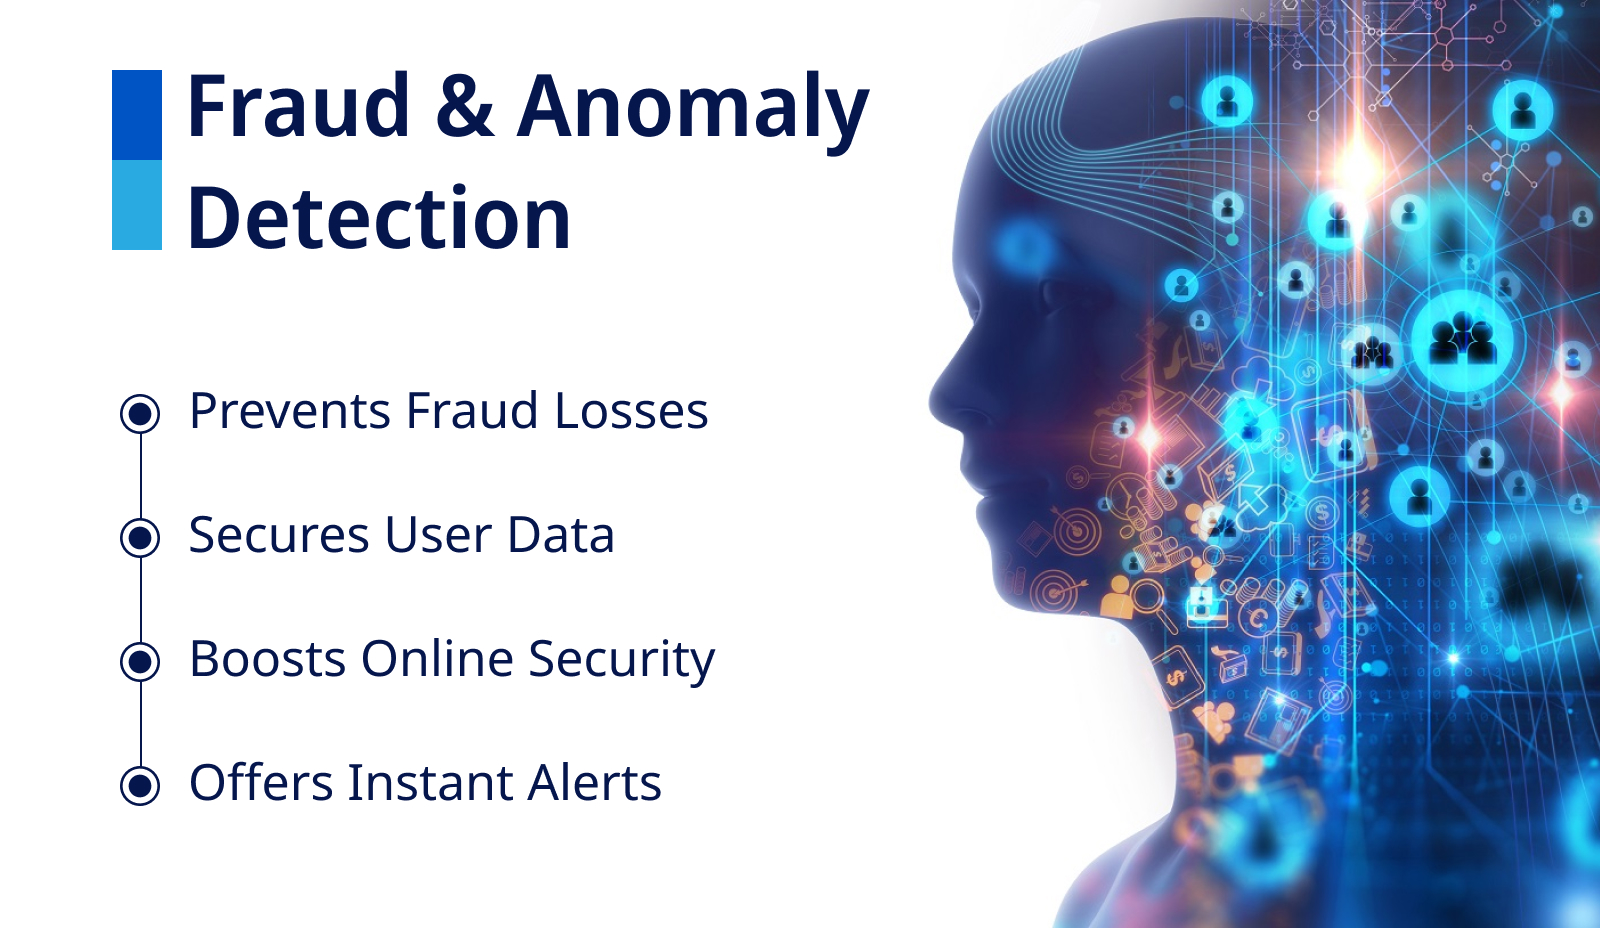 Fraud & Anomaly Detection